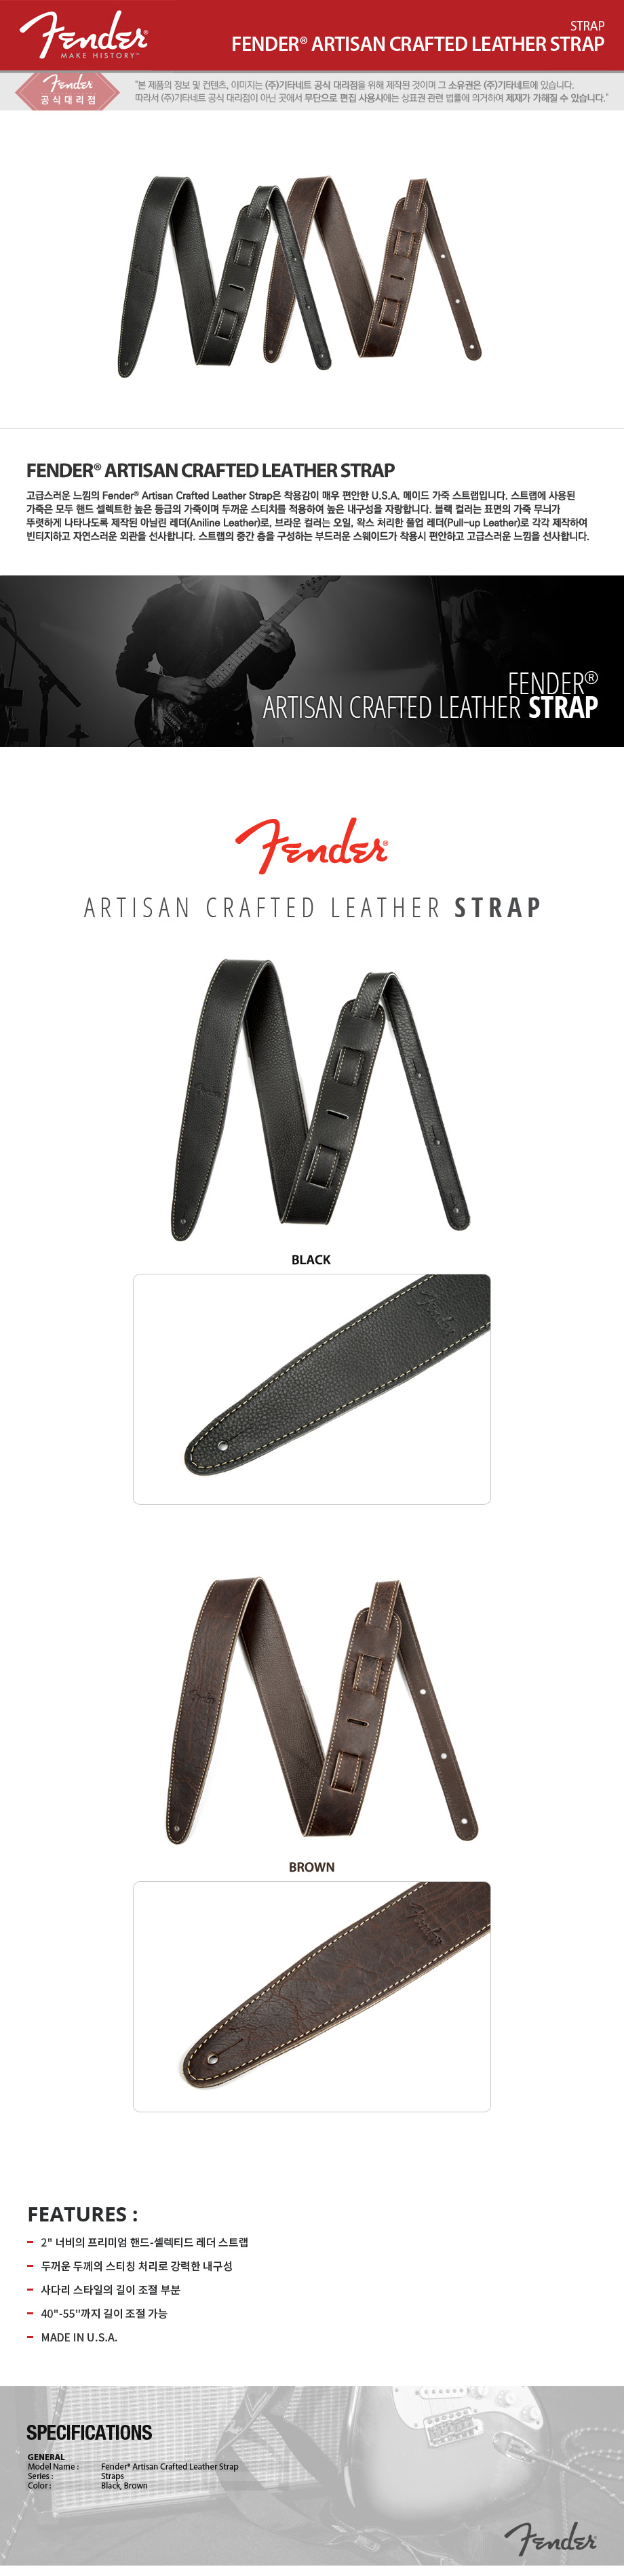 ARTISAN_CRAFTED_LEATHER_STRAP_150710.jpg